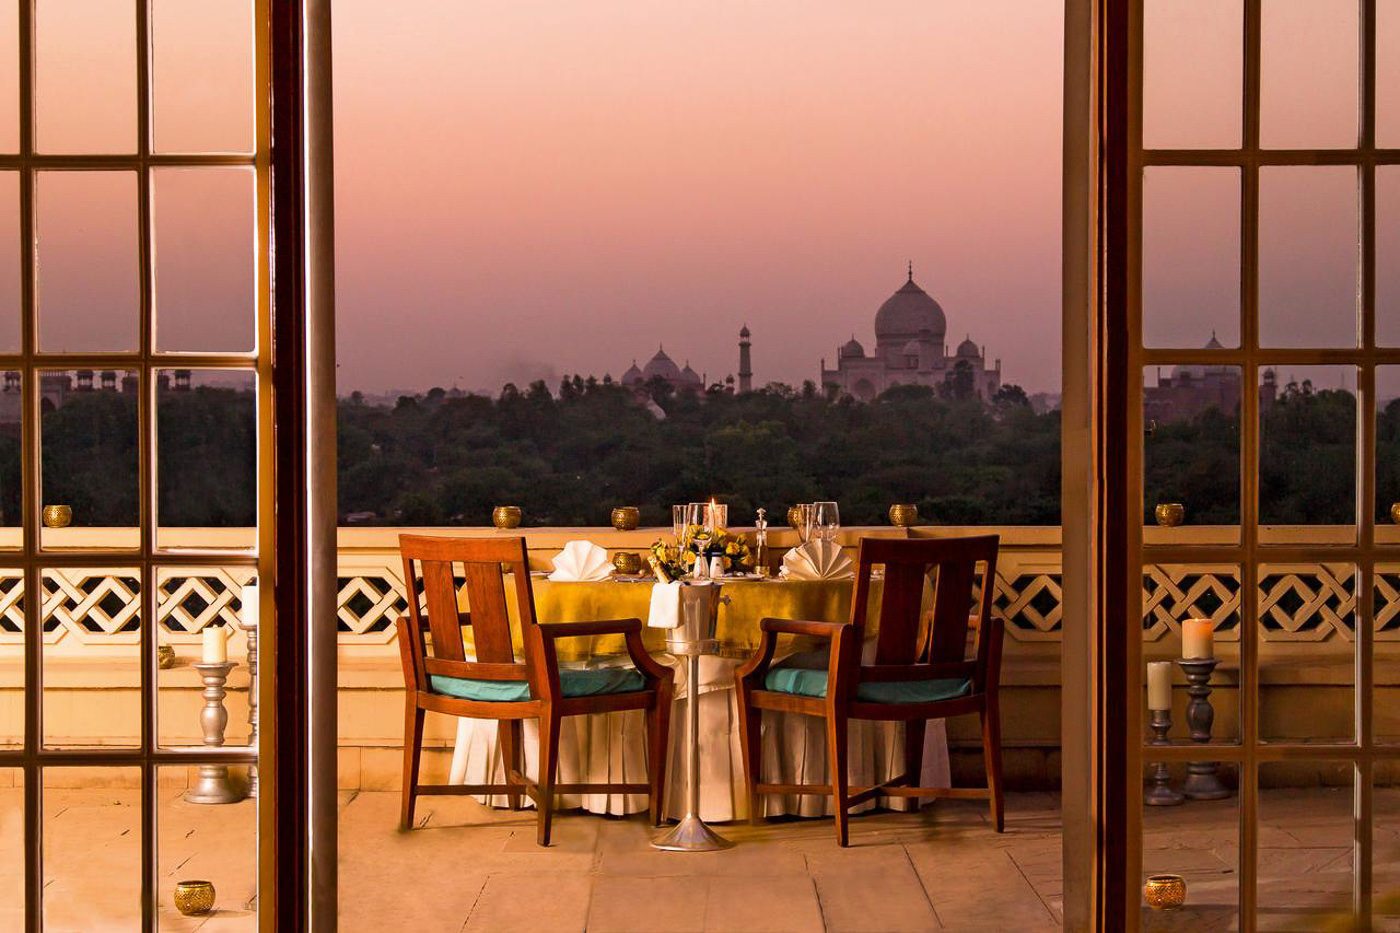 a view of the taj mahal from a balcony.